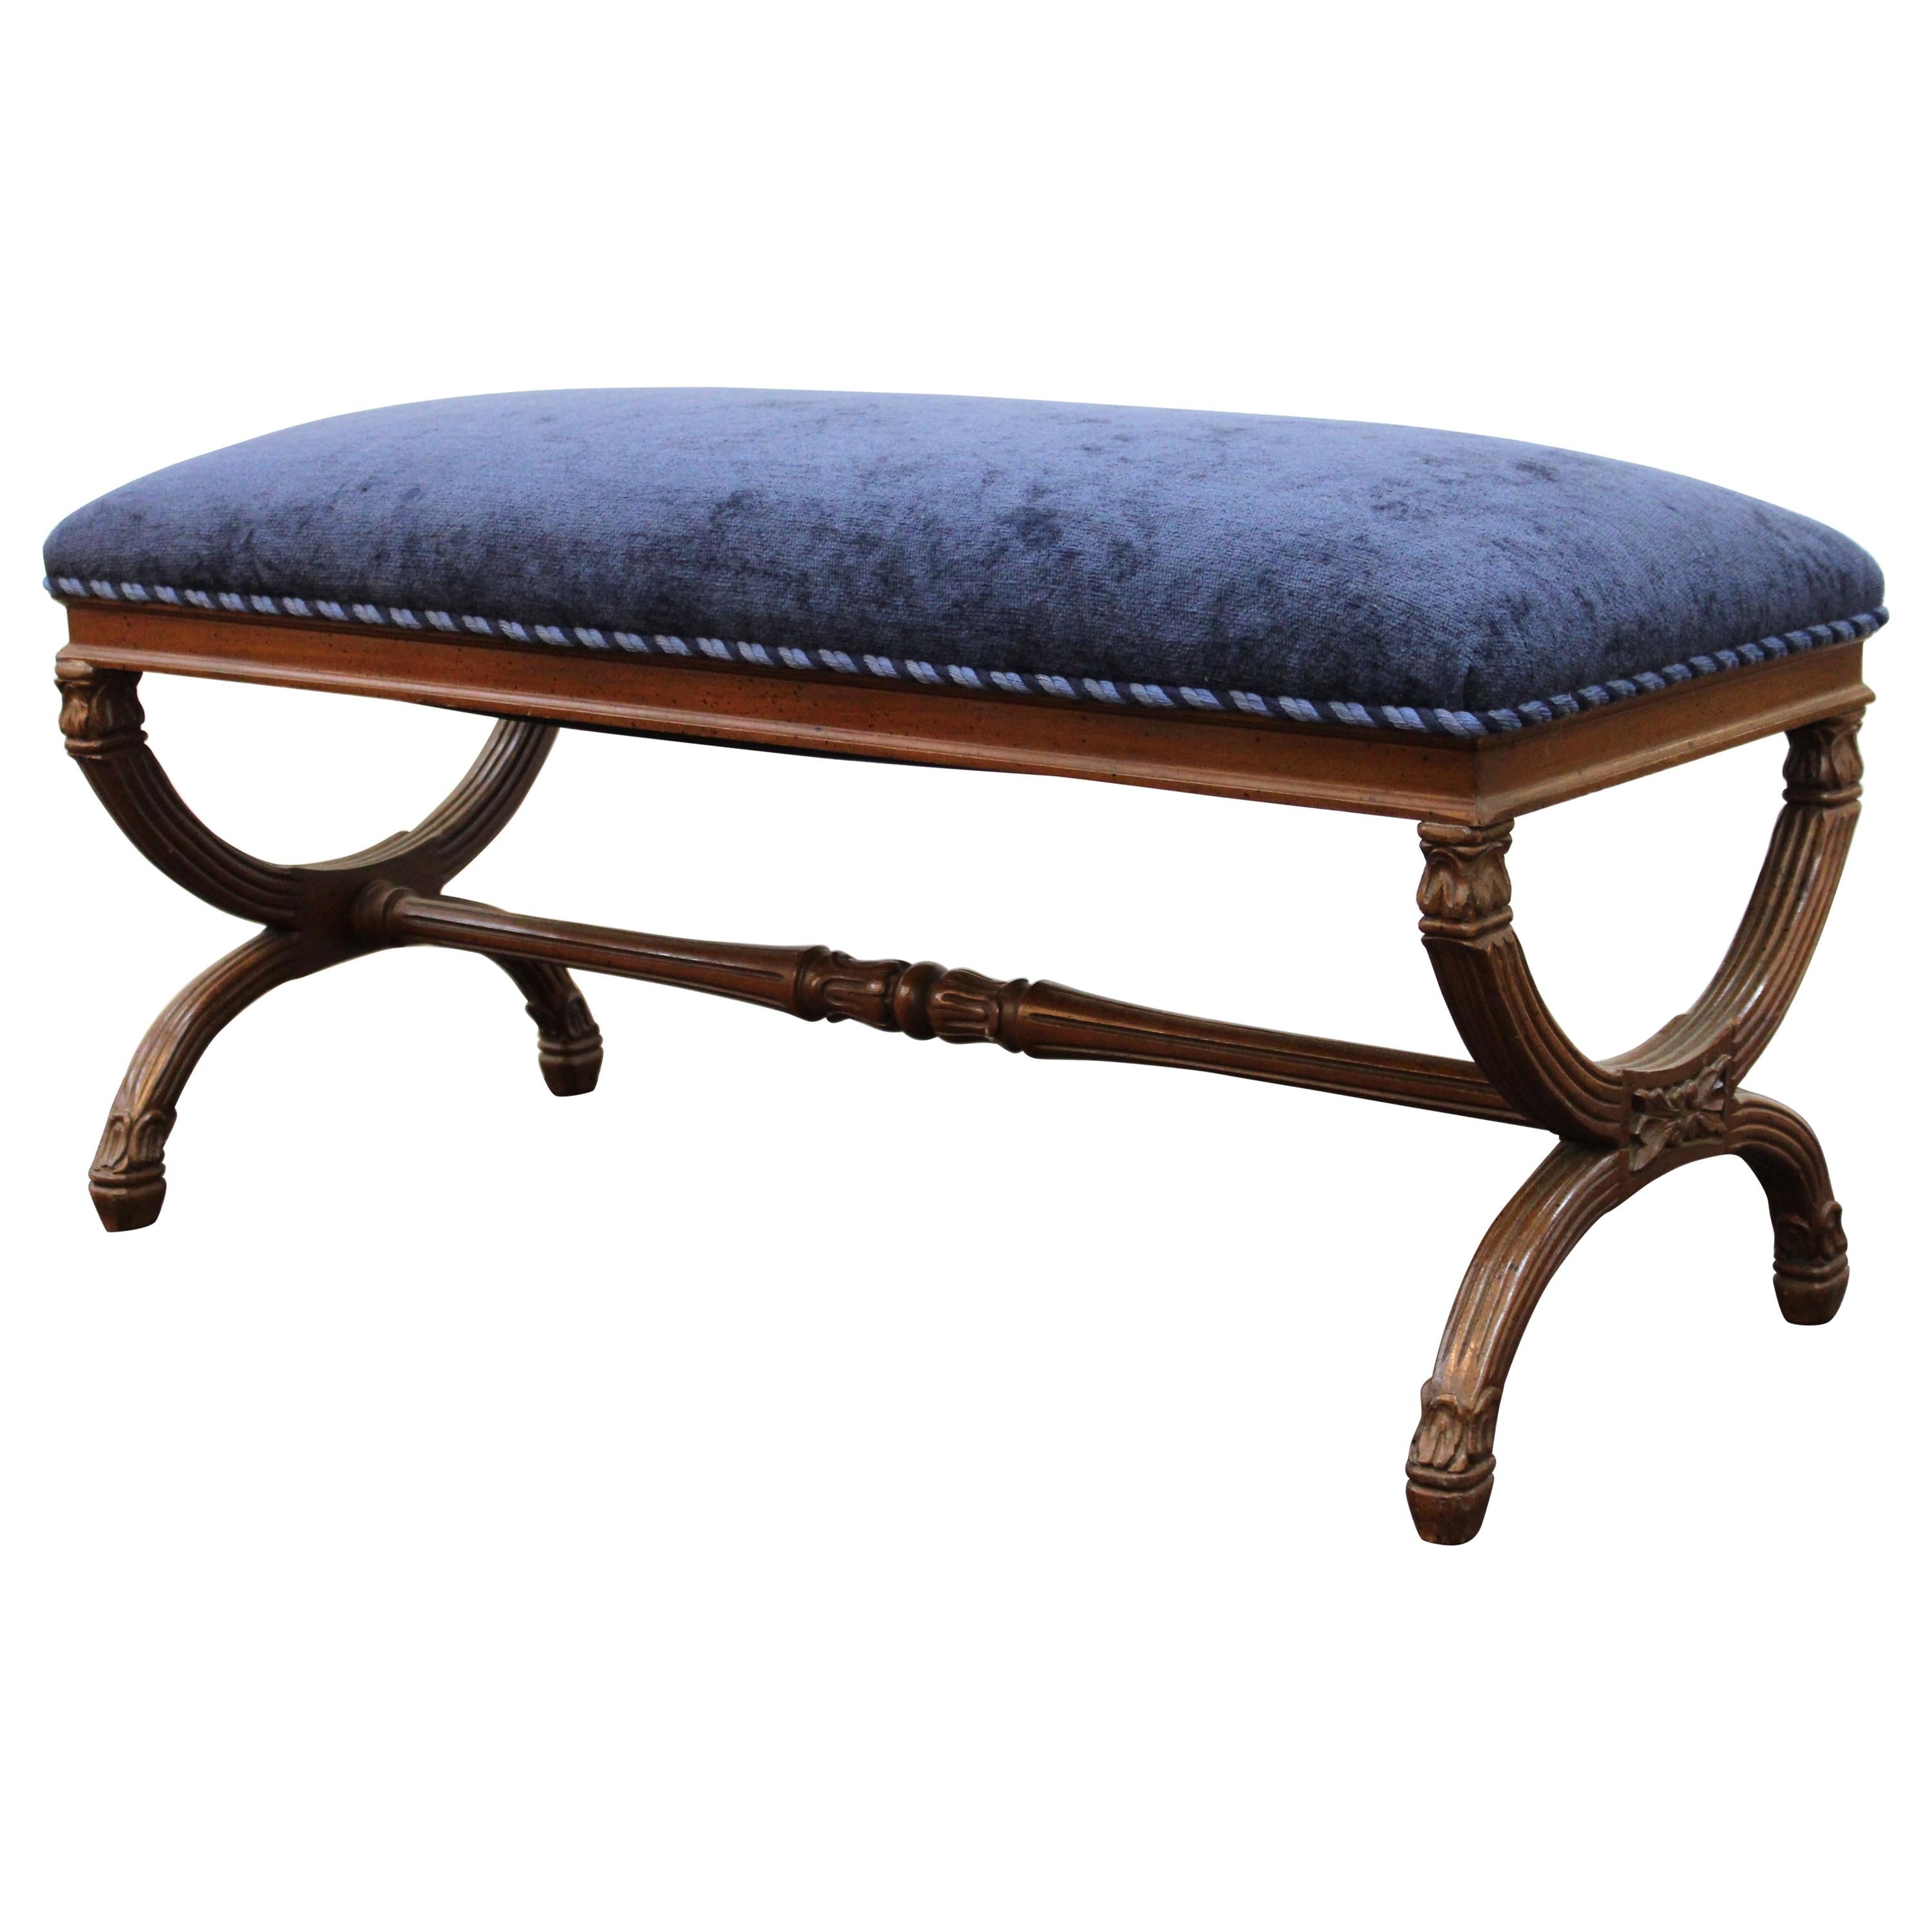 Neoclassical Style Bench with Braided Trim and Navy Chenille Upholstery